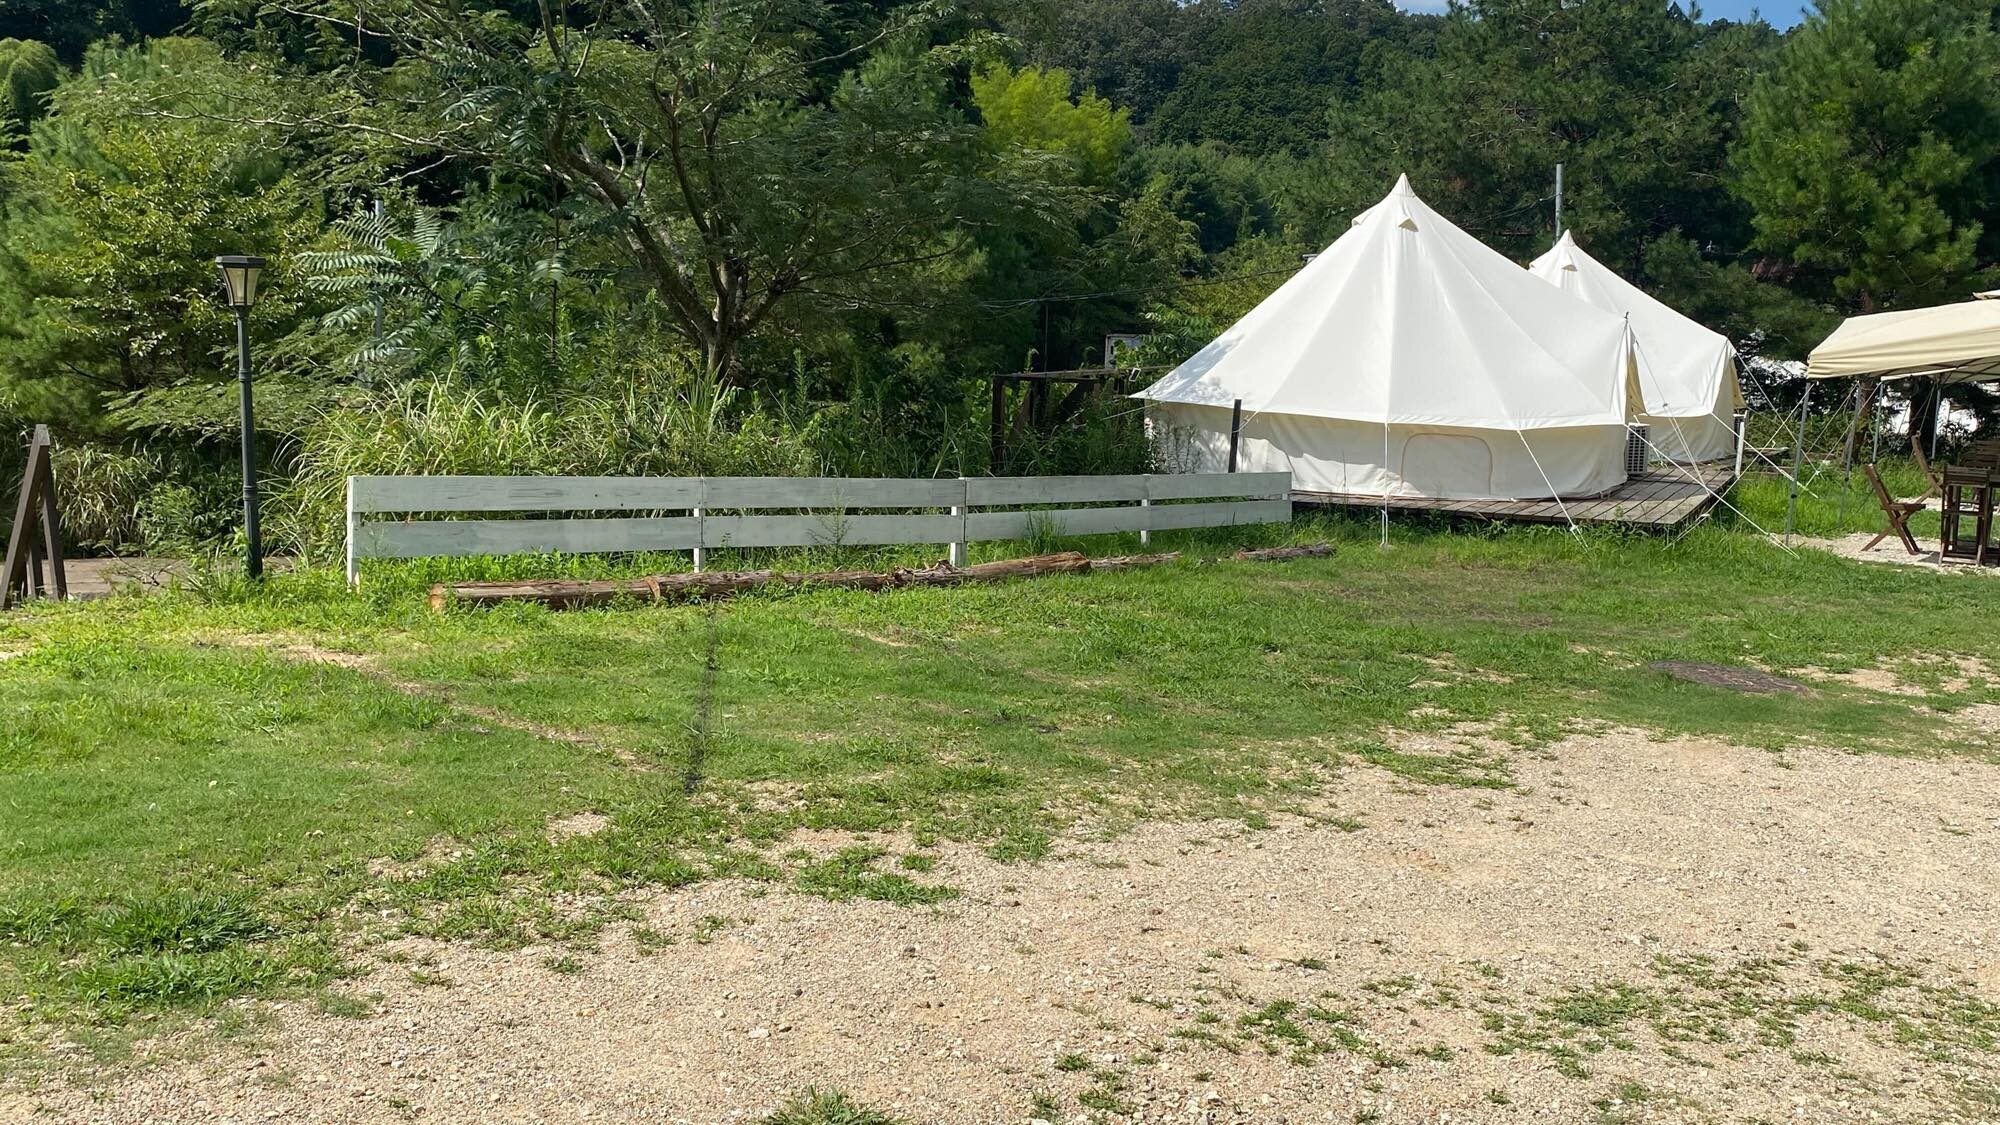 [Car entry OK] Cotton tent with wood deck <#5, #6> Parking lot